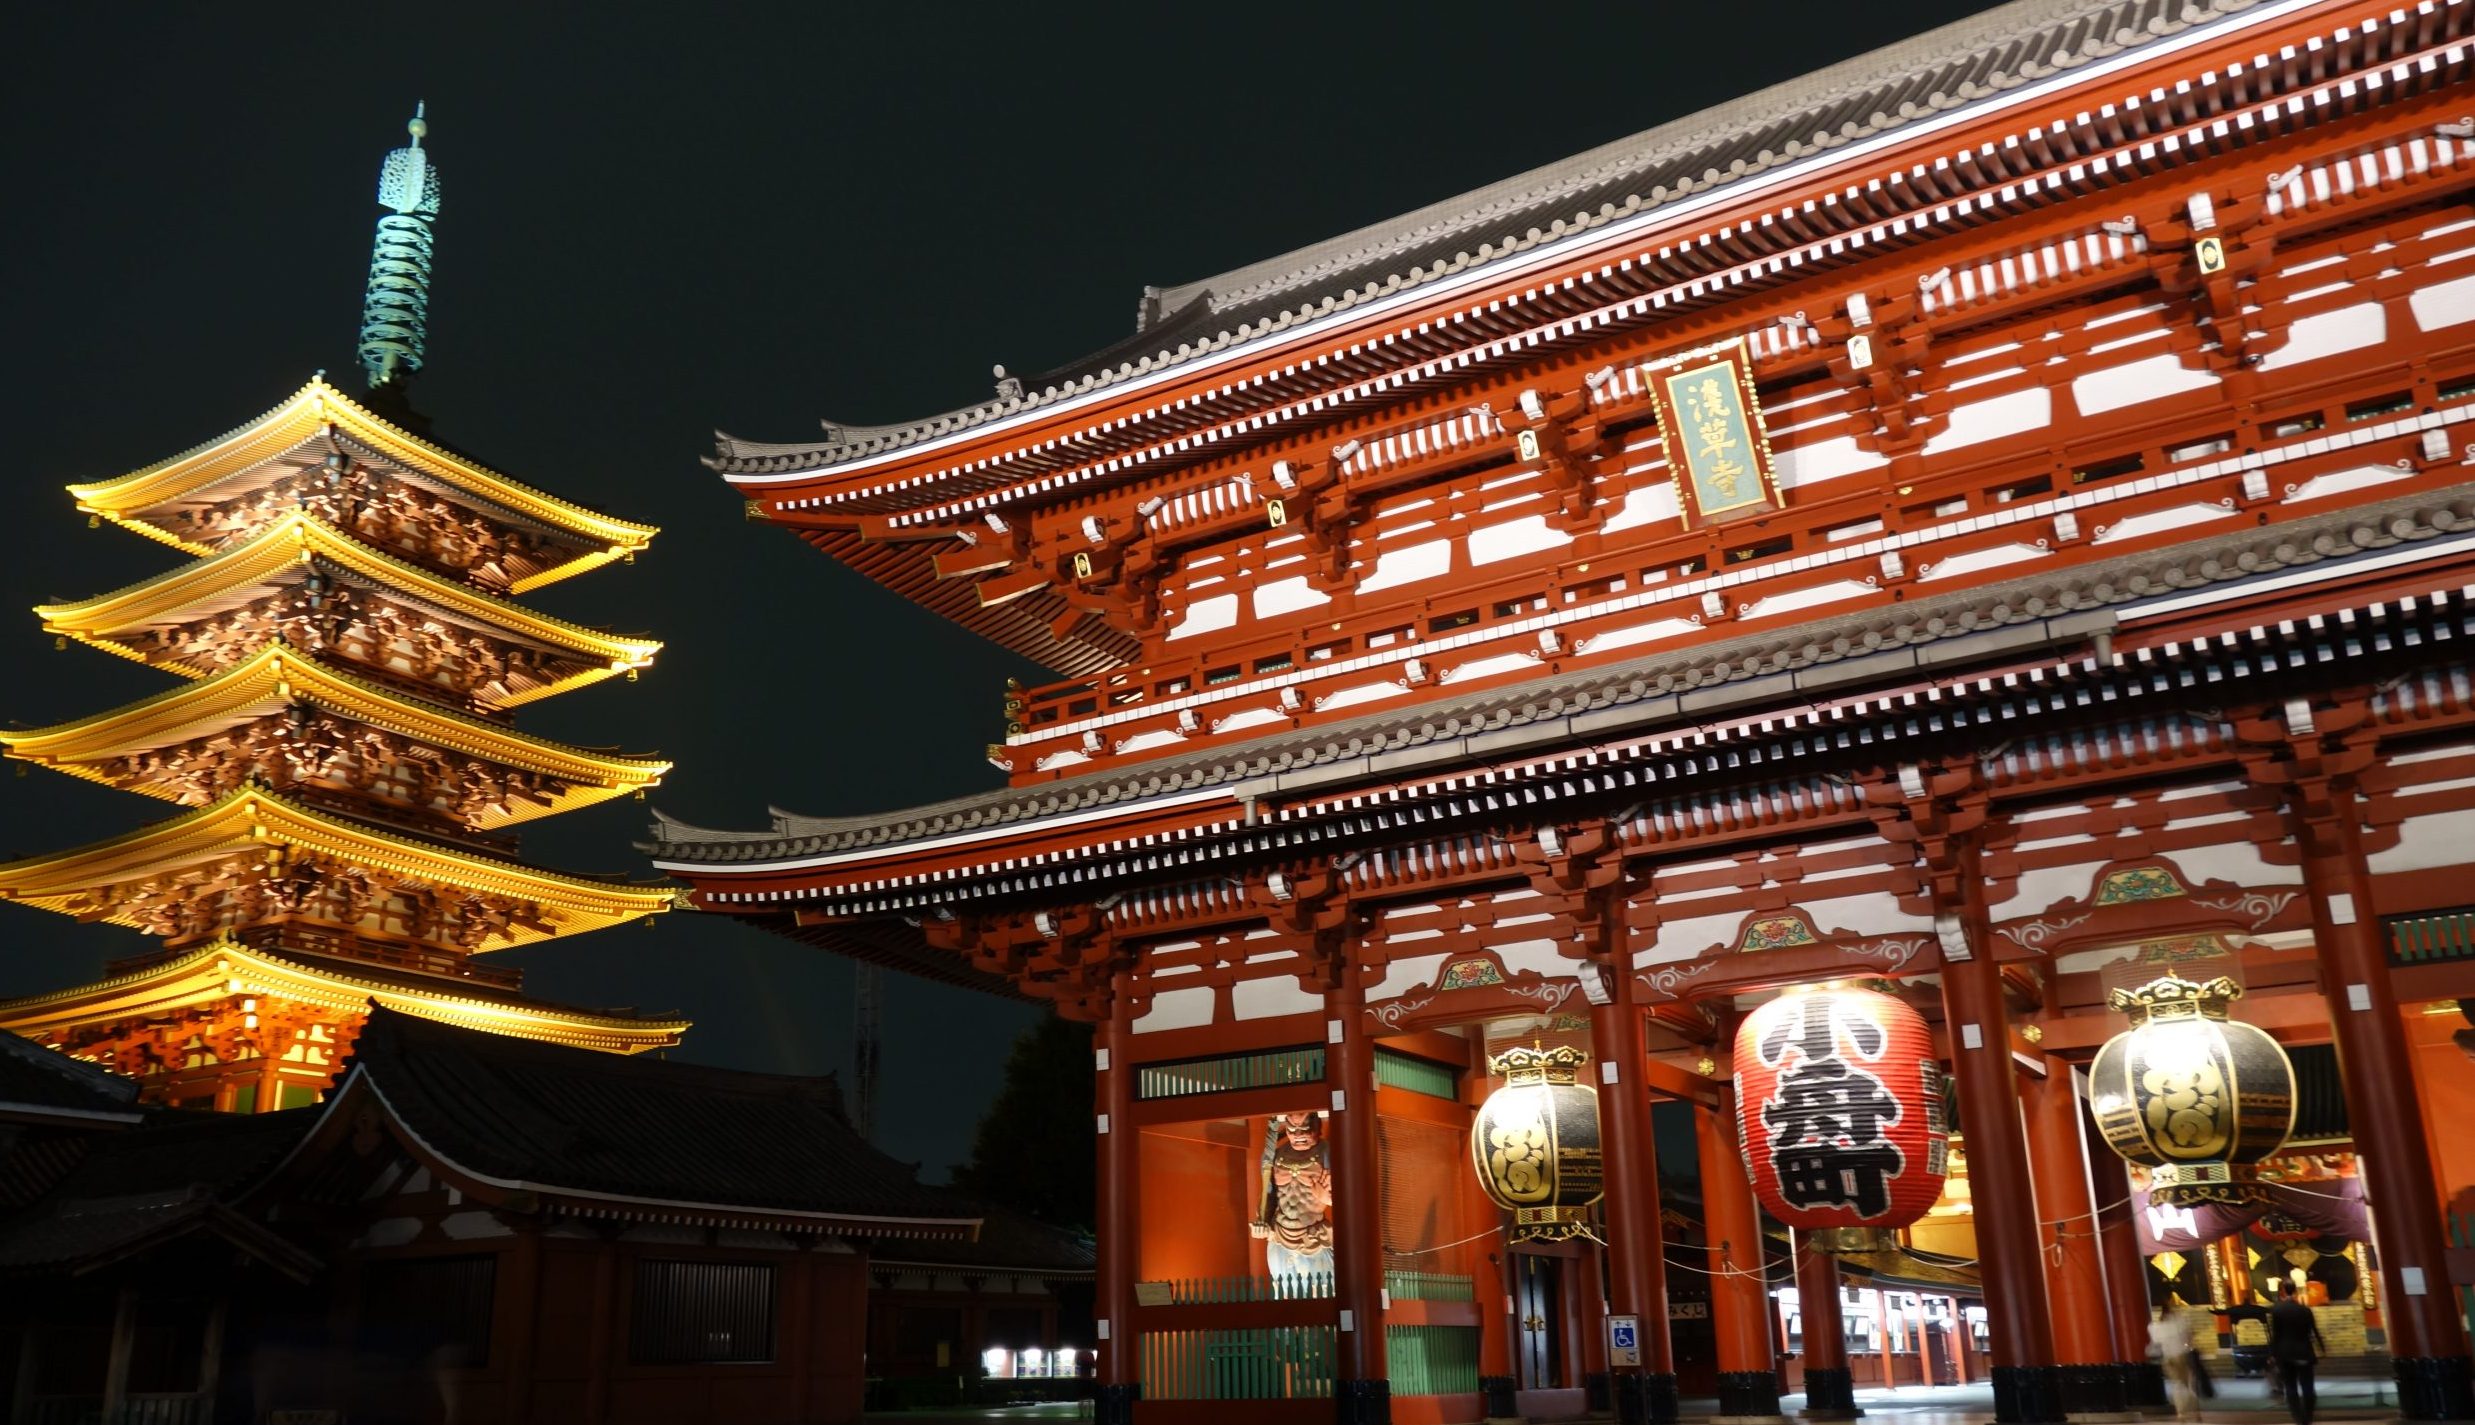 A Mixture of Modernism and Authenticity: Tokyo Tower and Zojoji Temple, Skytree and Sensoji Temple